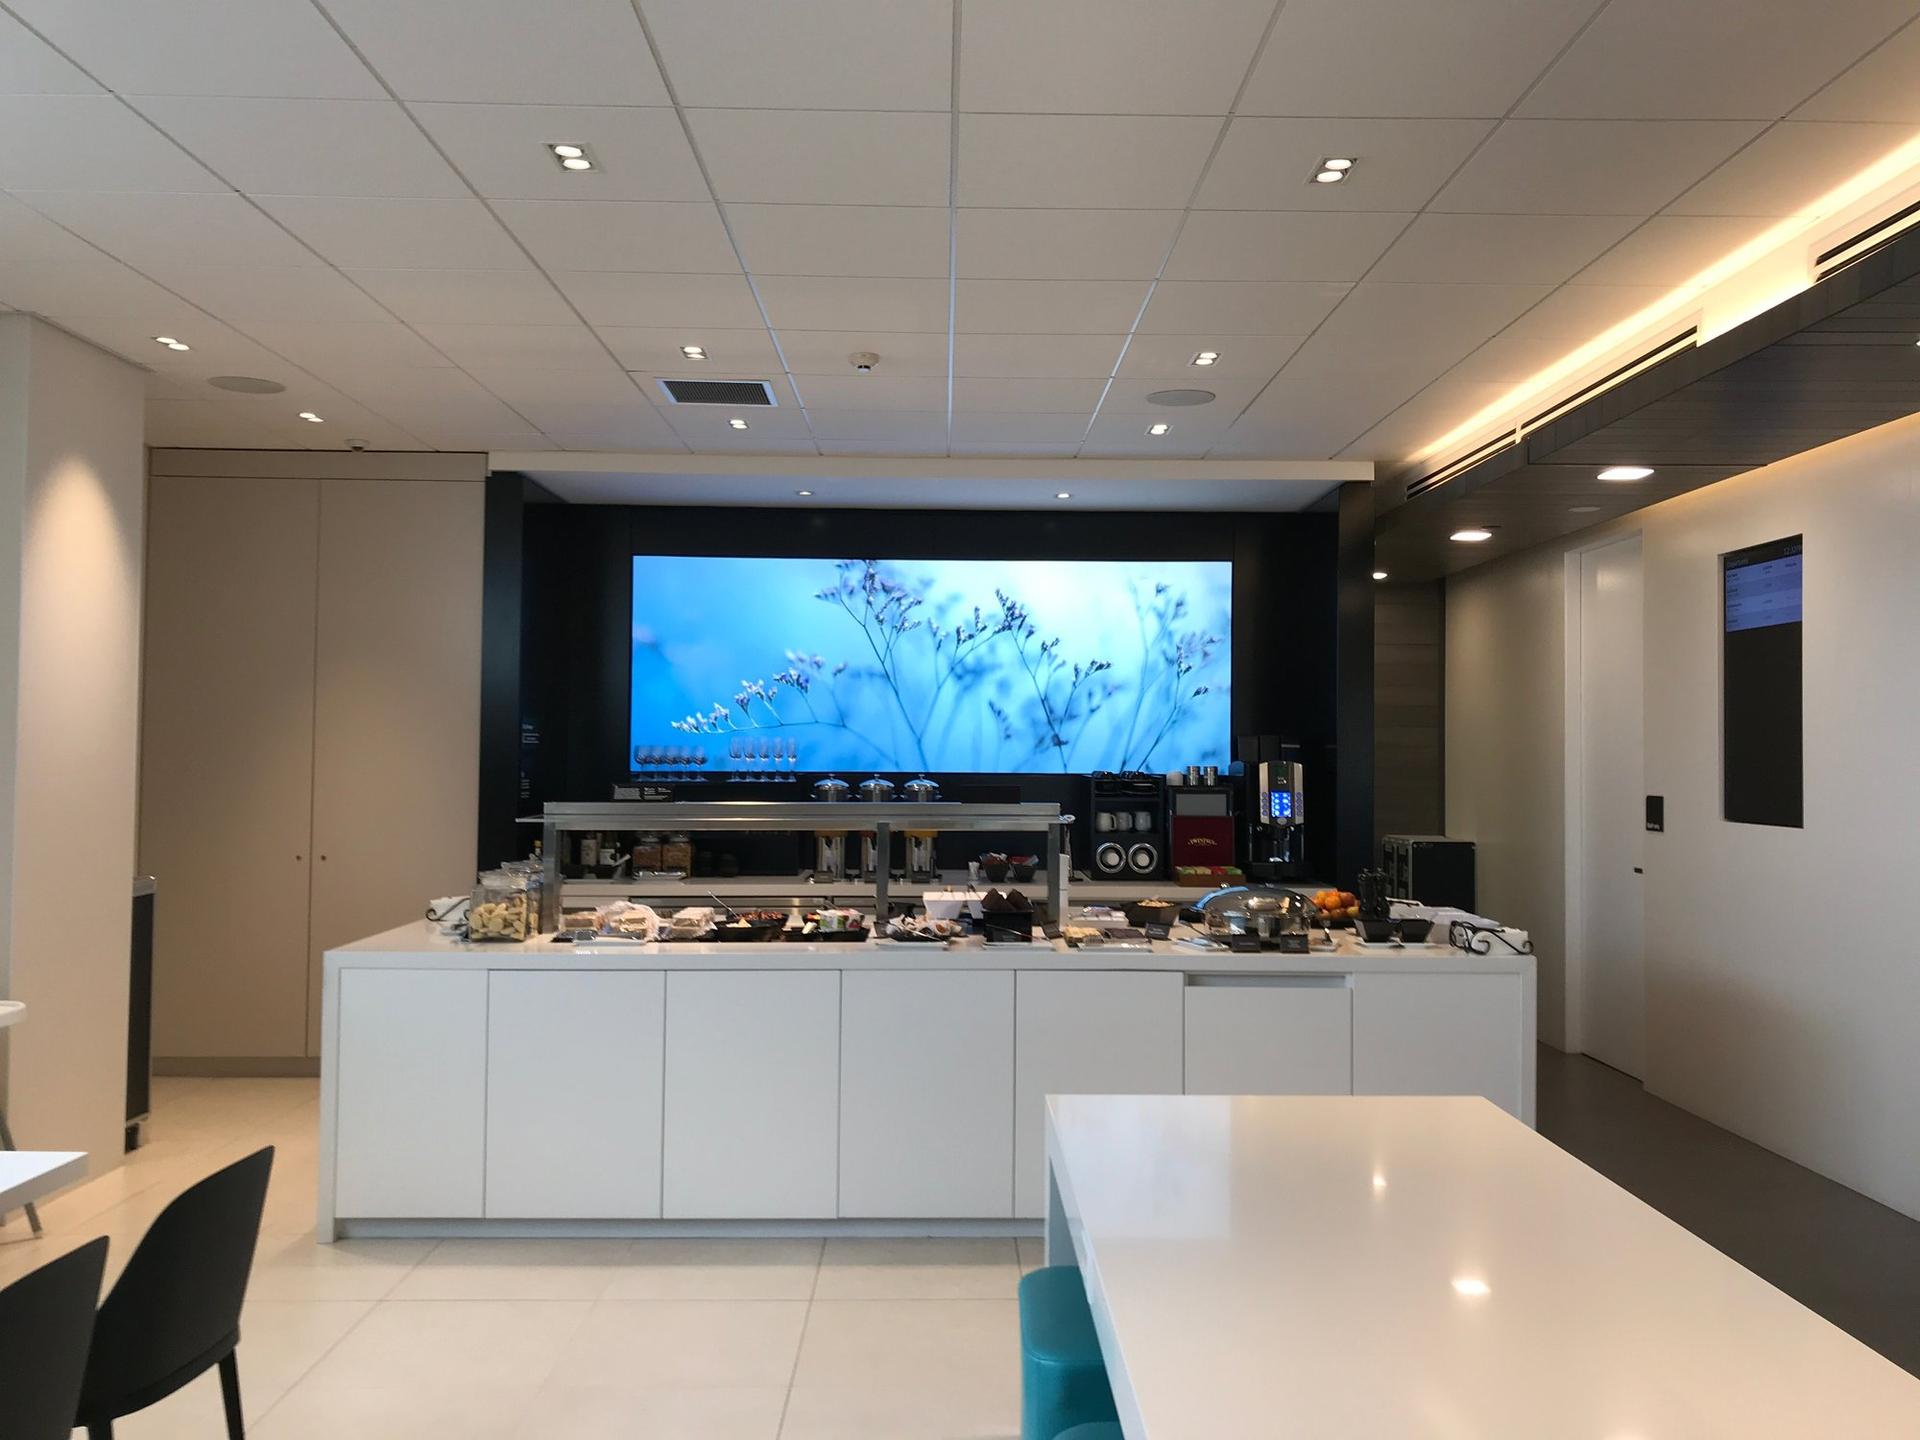 Air New Zealand Regional Lounge image 3 of 3